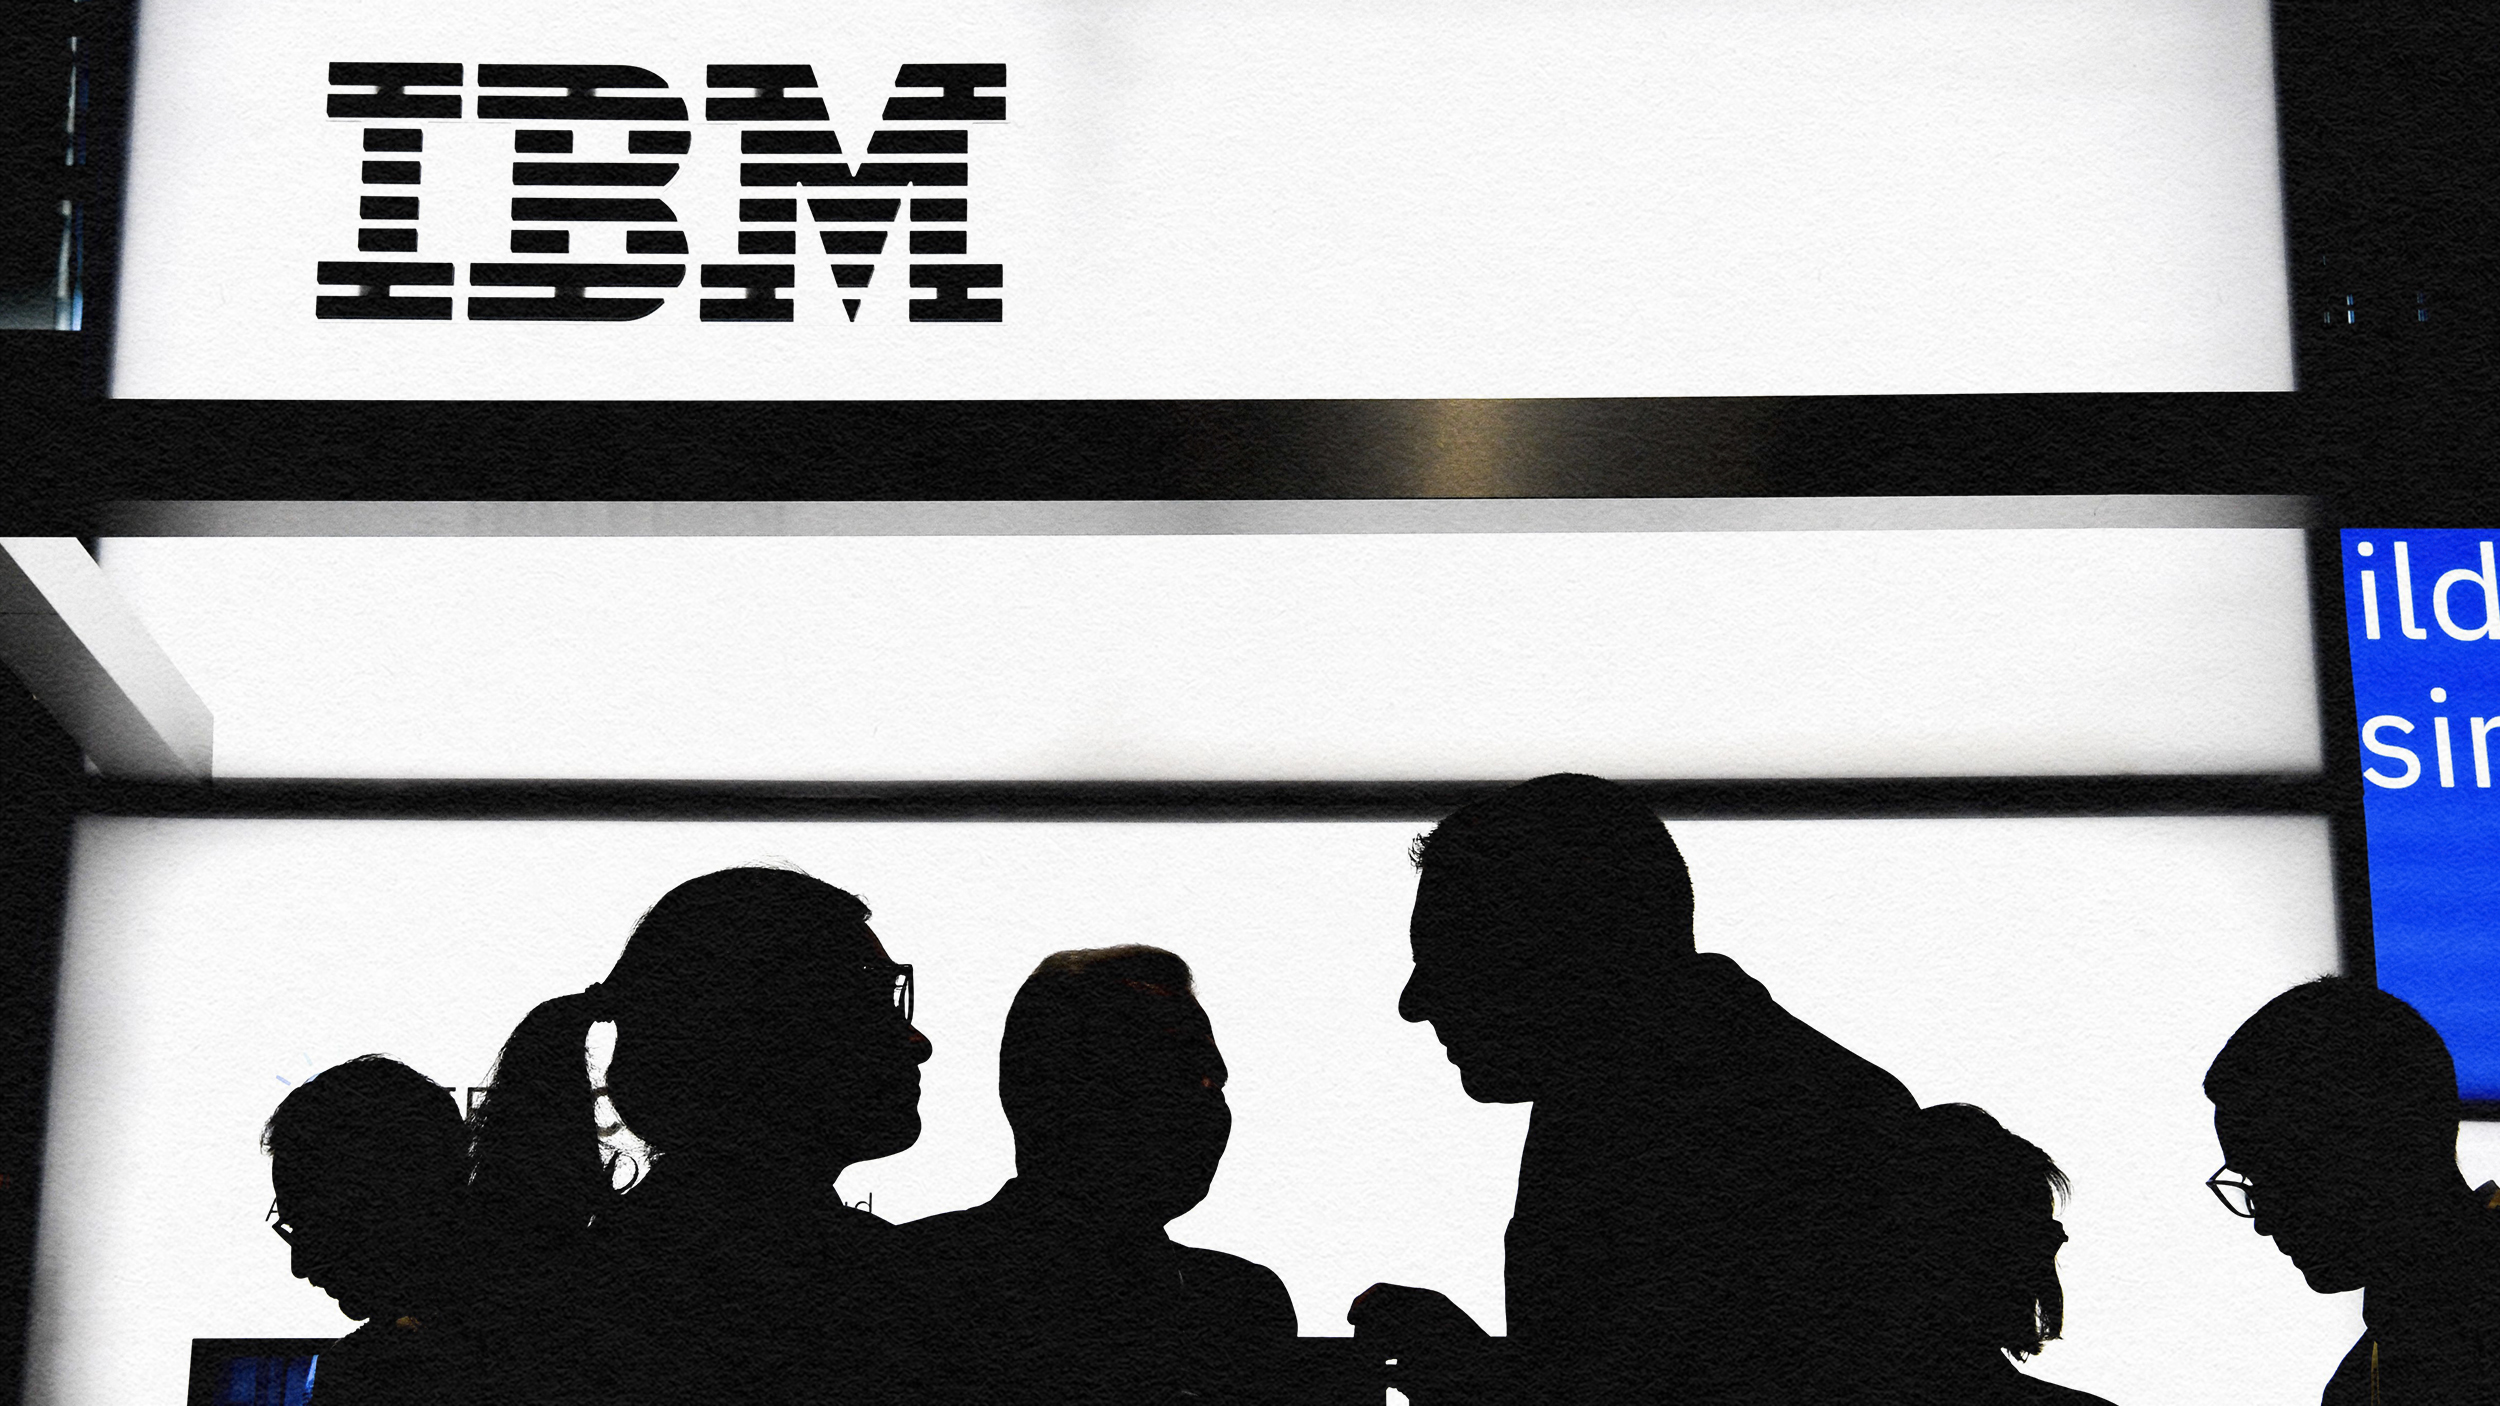 Innovation leaders standing in front of the ibm logo.